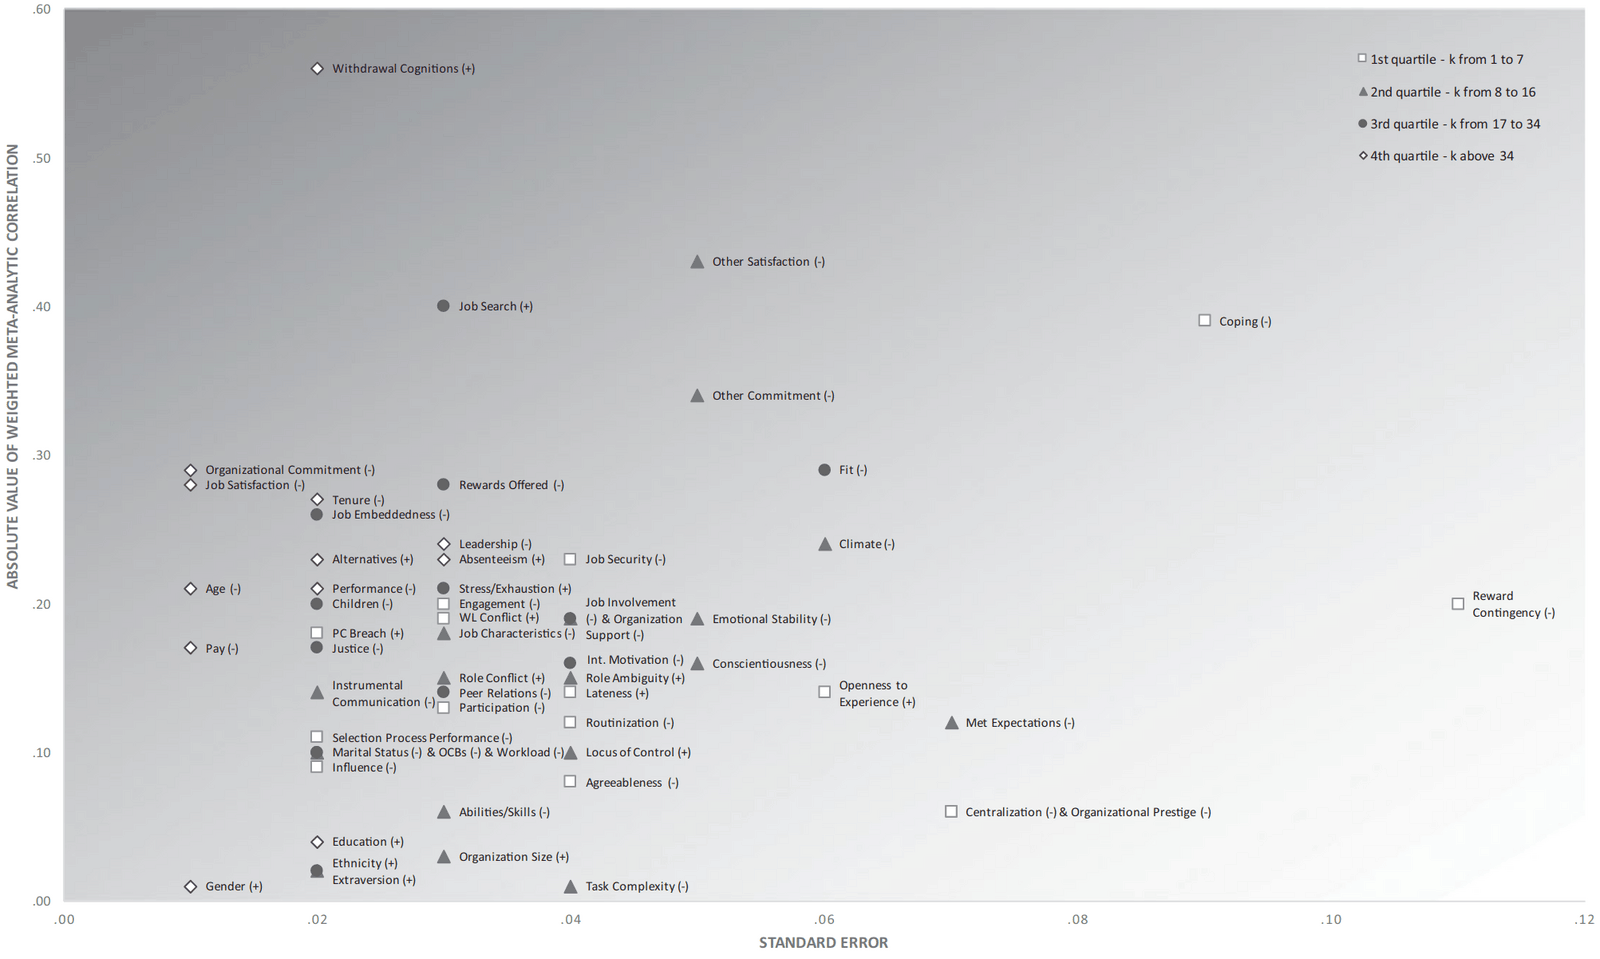 Figure 1: Summary of meta-analytic turn-over antecedent estimates (as effects sizes by standard errors). Note: Correlations signs indicated in parentheses. OCB = organizational citizenship behavior. PC breach = psychological contract breach. Due to visual overlap, we note extraversion, OCBs and organizational support are in the 2nd quartile of studies (k) accumulated; ethnicity, job involvement, marital status and workload are in the 3rd quartile.